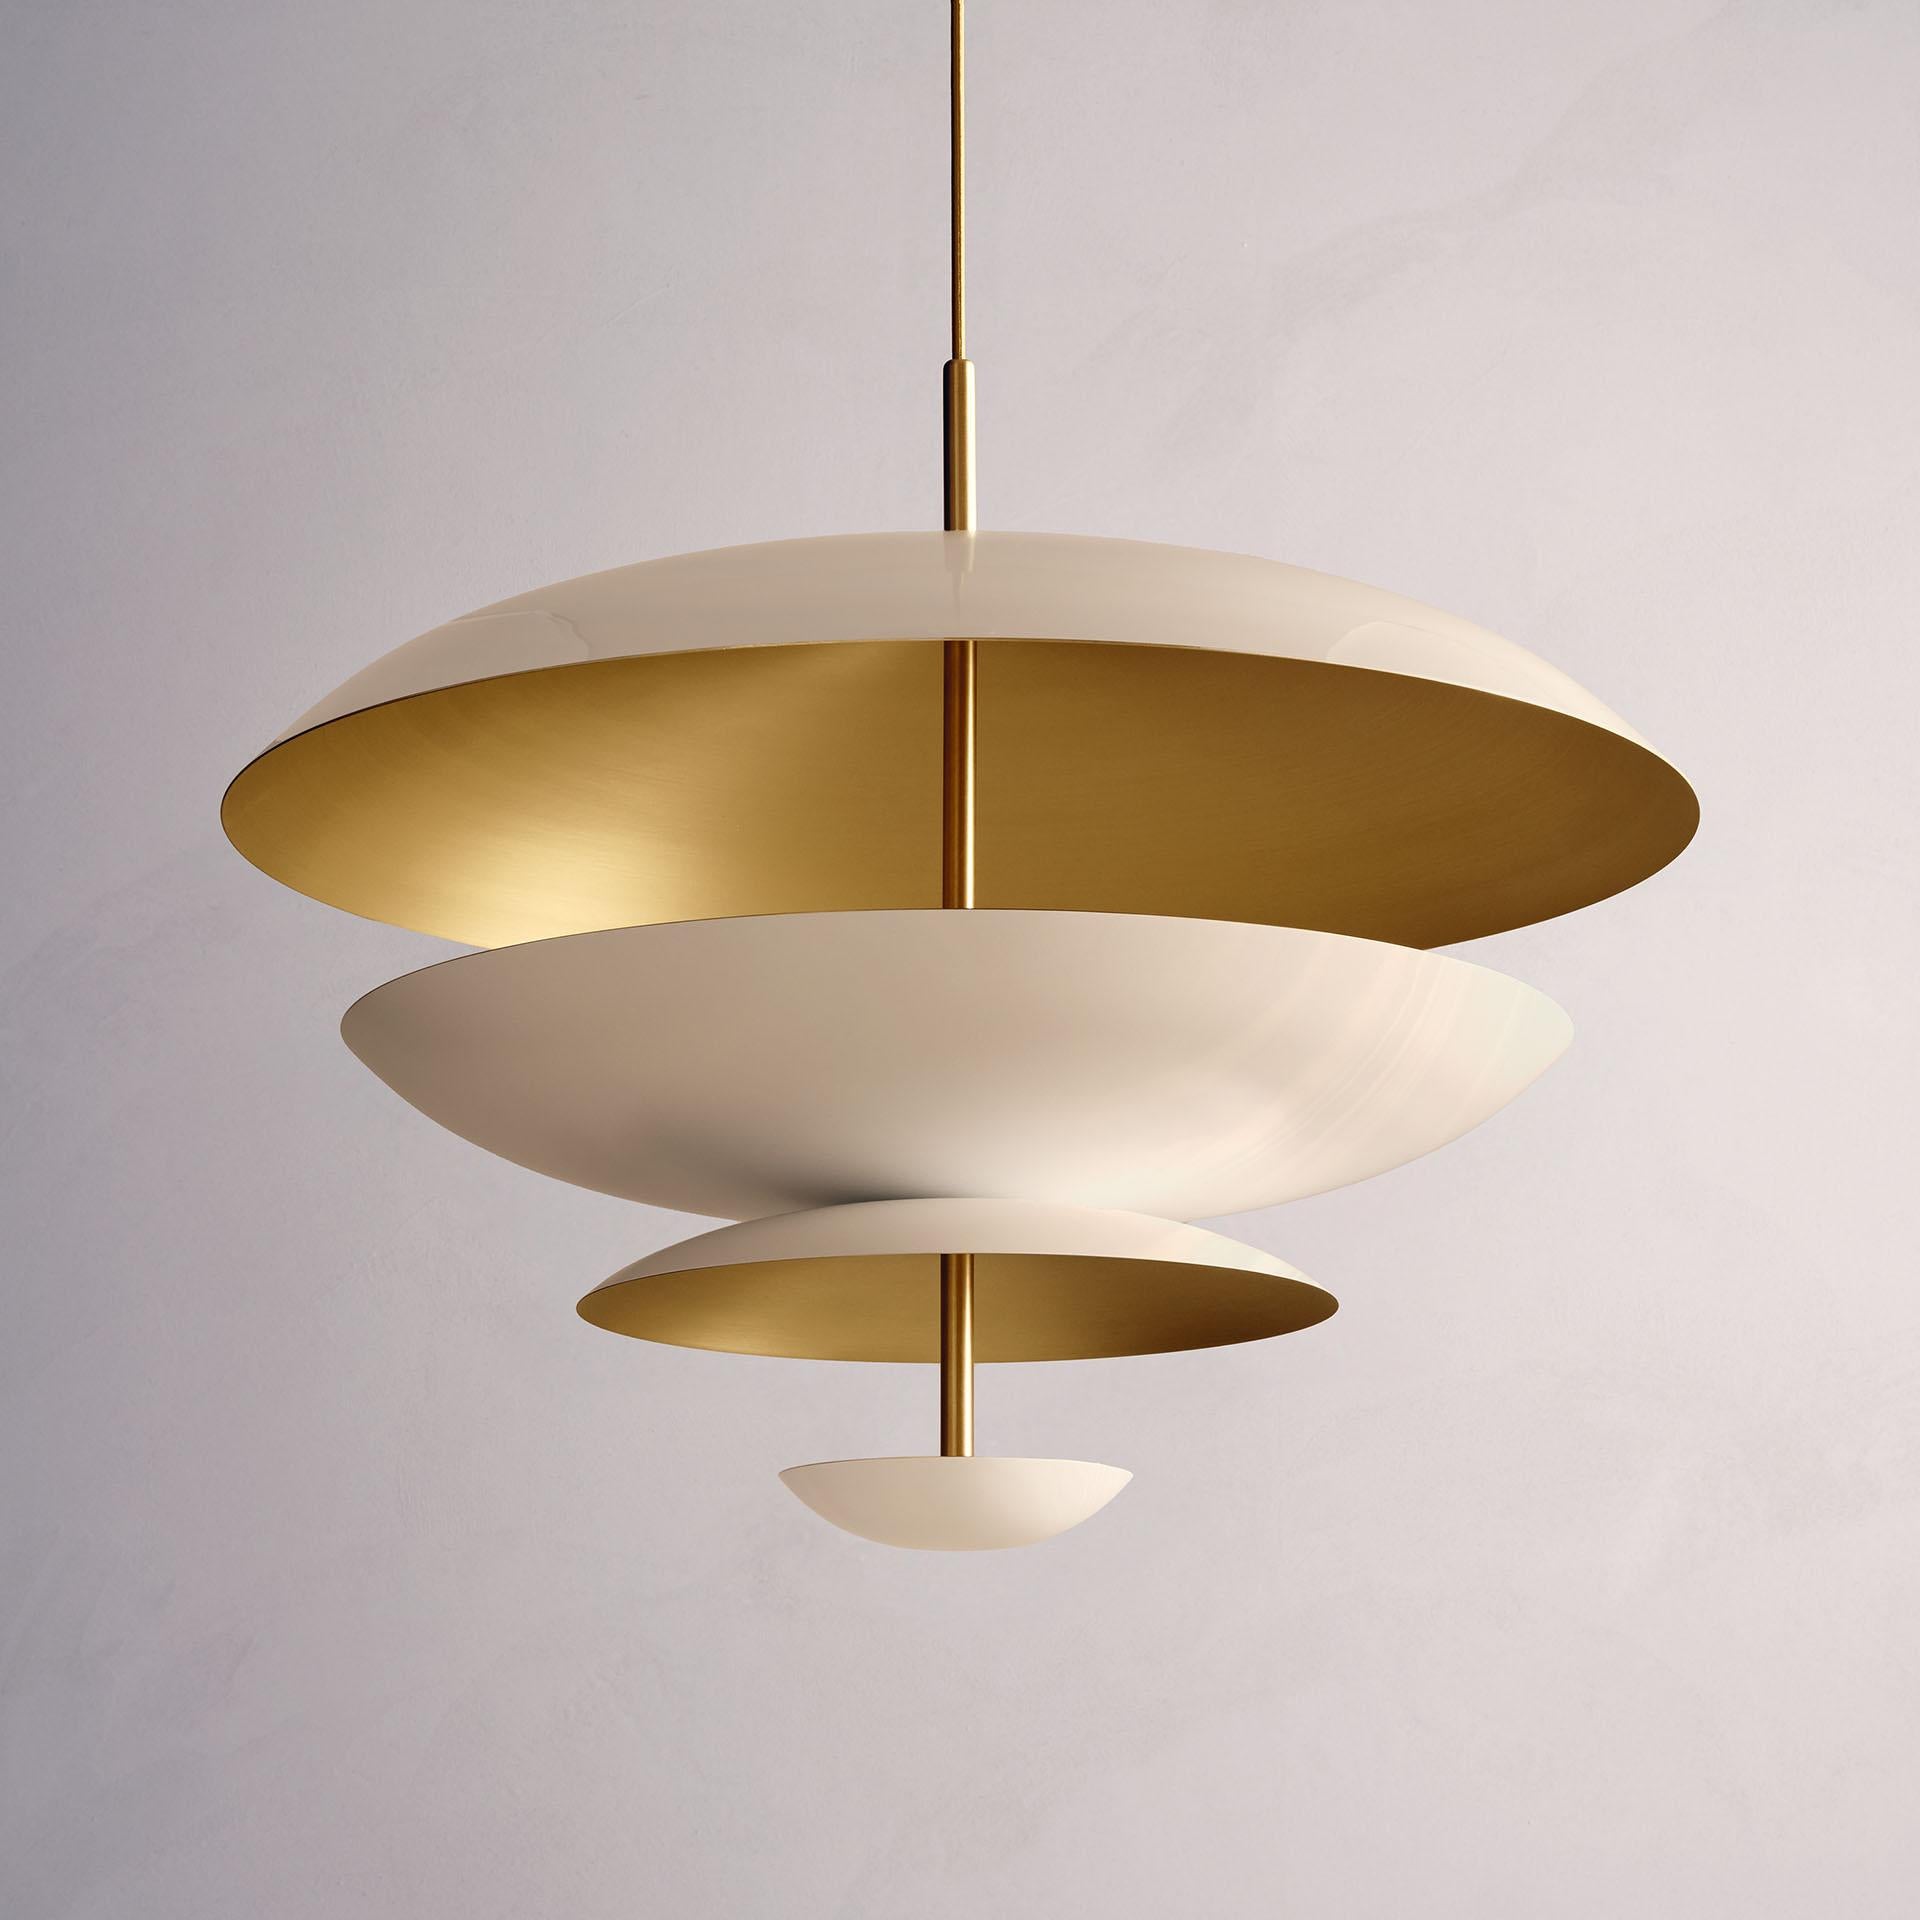 'Cosmic Purion Chandelier 70' Handmade Piano Lacquered Brass Ceiling Lamp In New Condition For Sale In London, GB